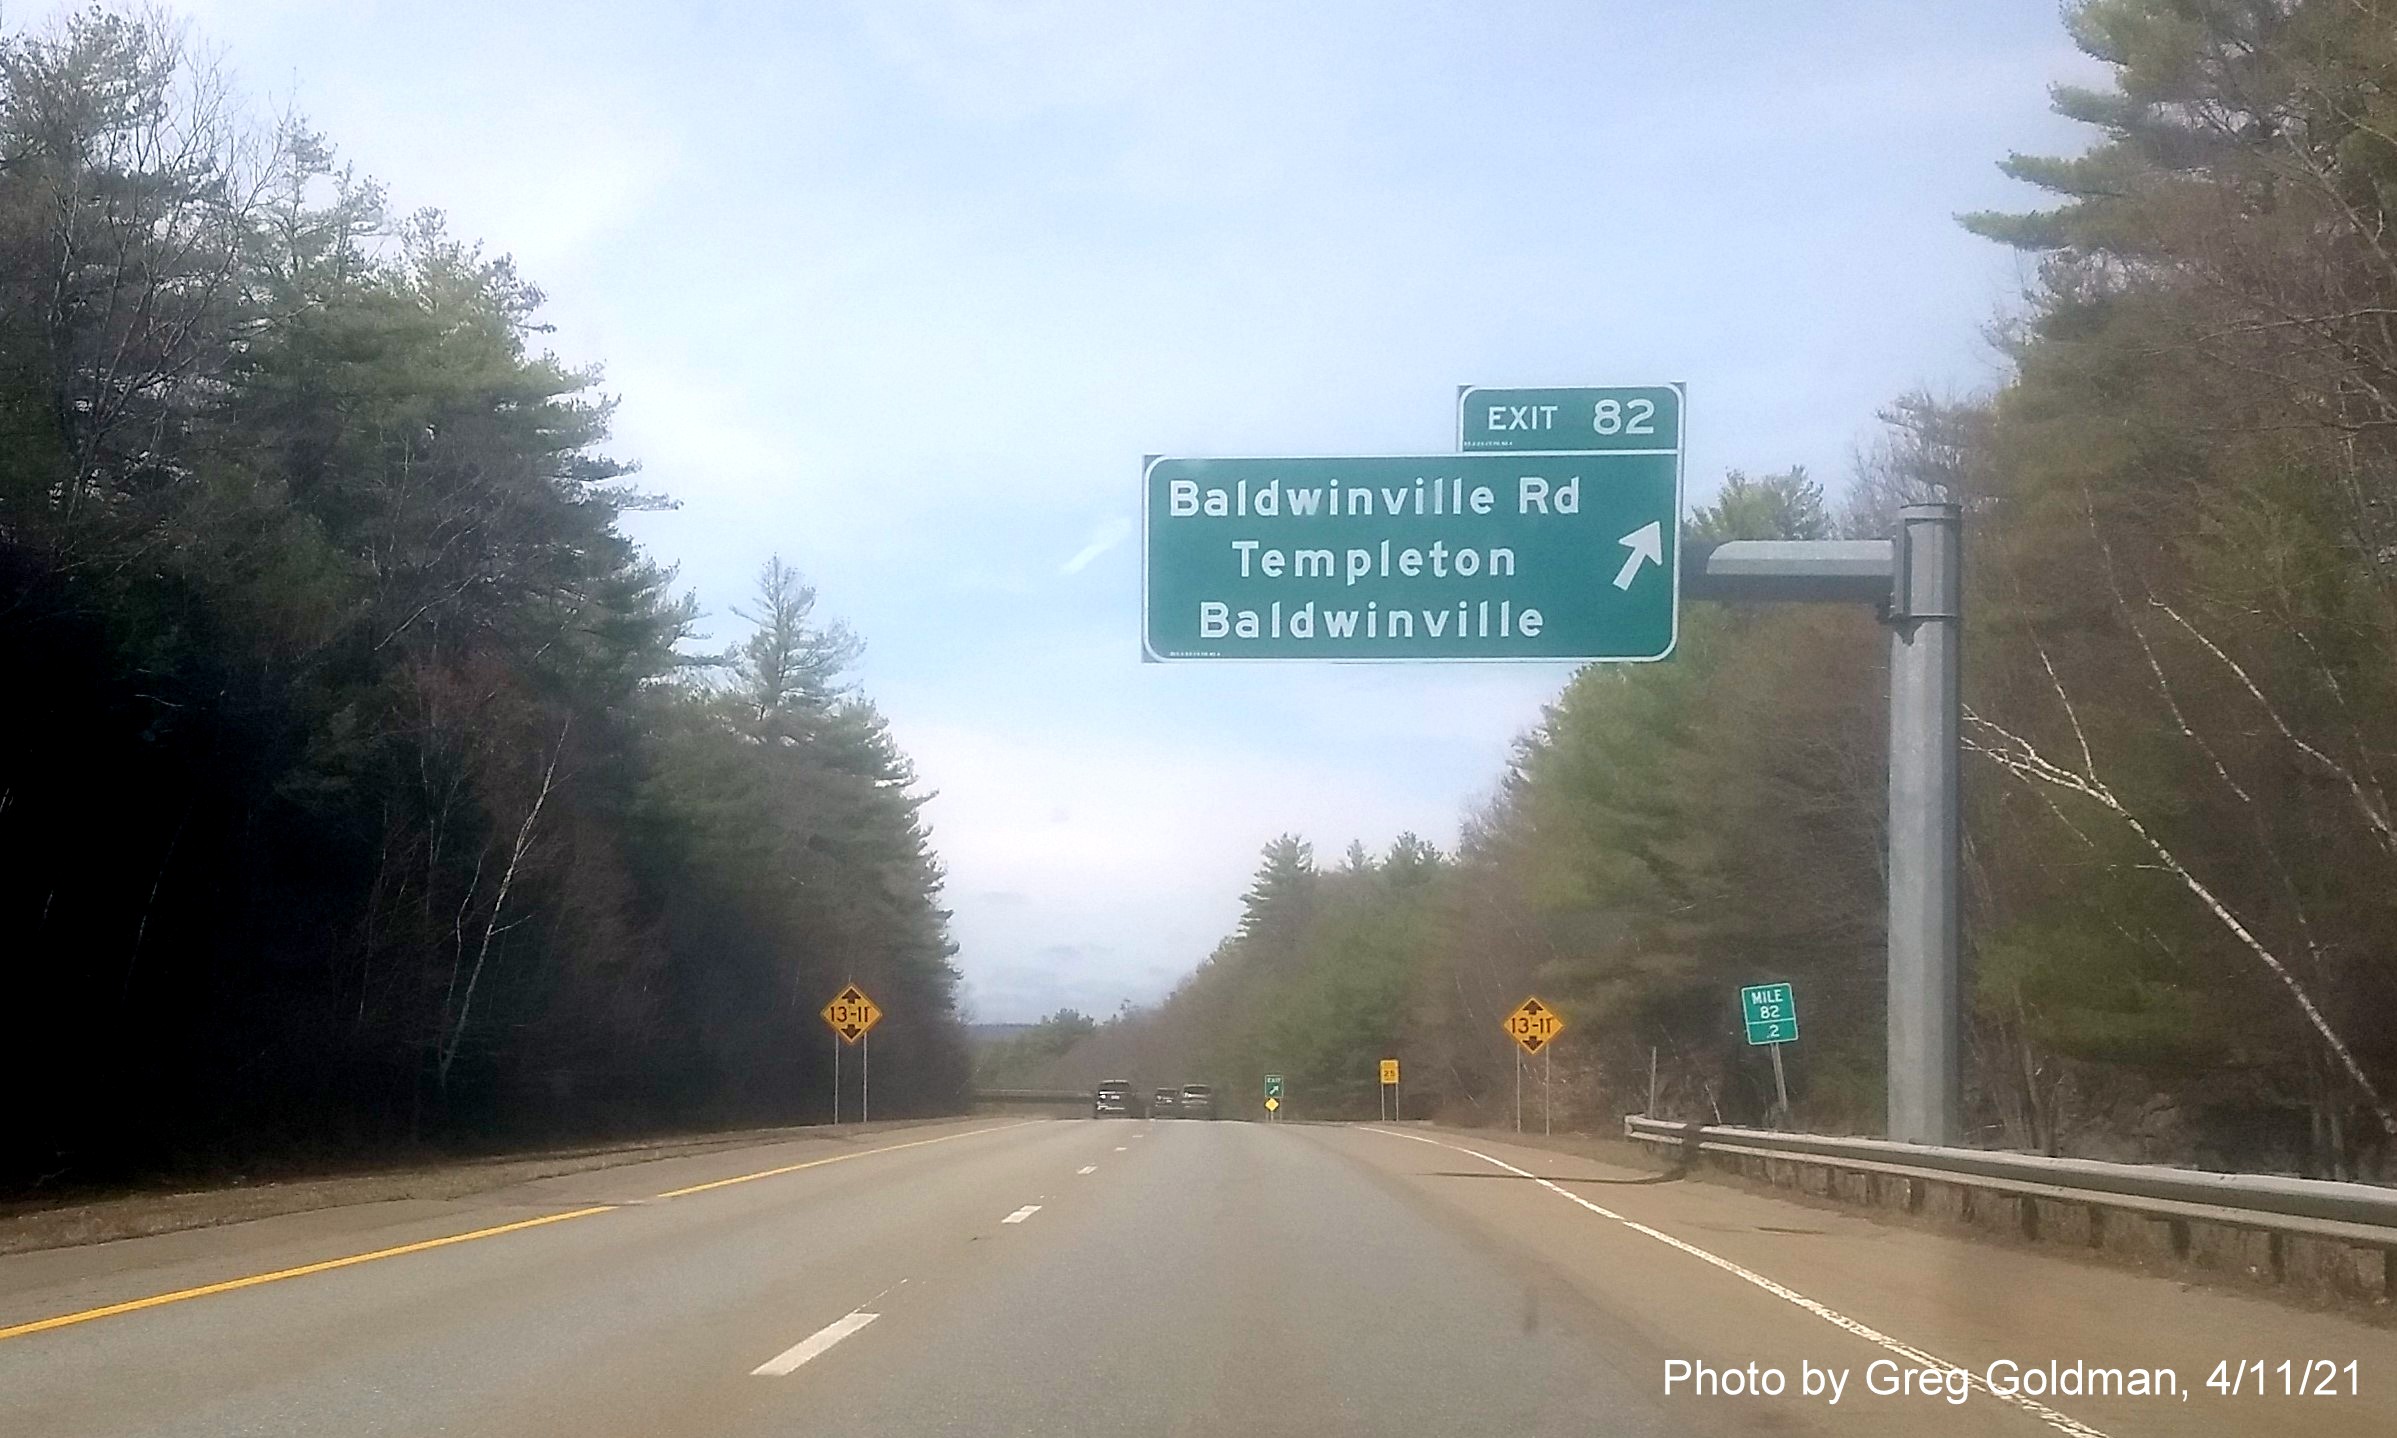 Image of ramp sign for Baldwinville Road exit with new milepost based exit number on MA 2 West in Templeton, by Greg Goldman, April 2021